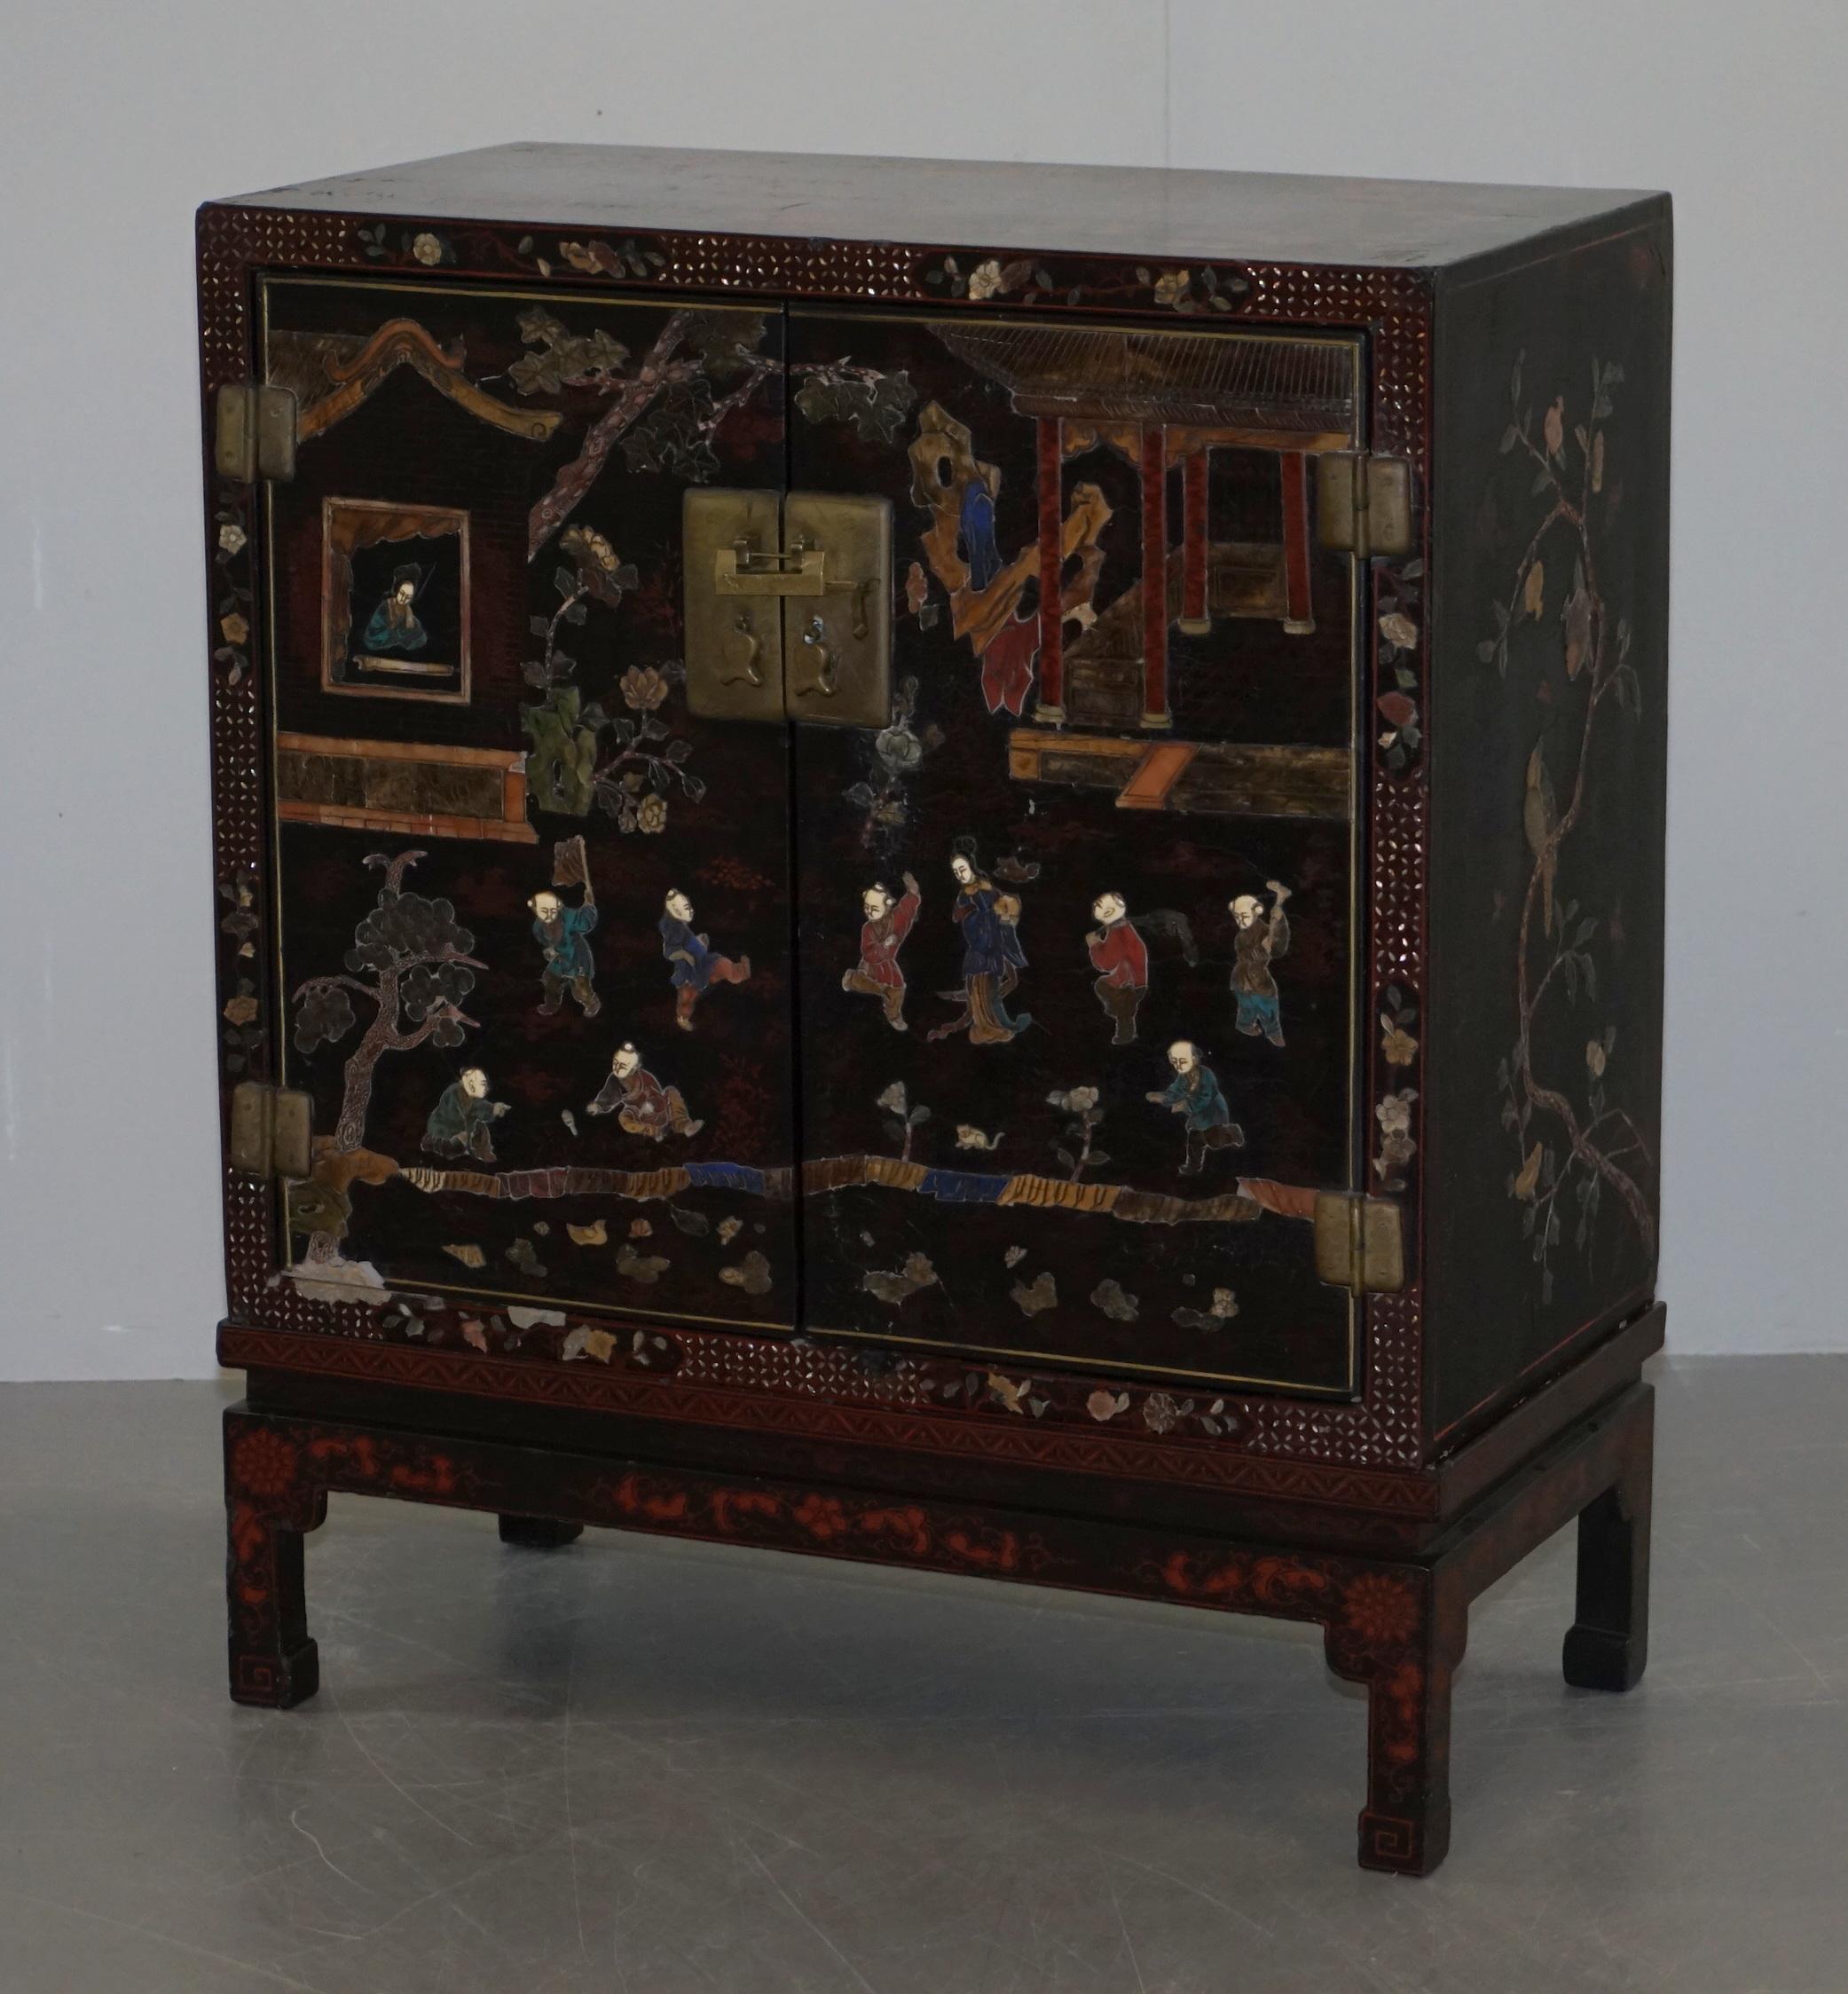 High Victorian 19th Century Mother of Pearl Inlaid Chinese Lacquer Brass Engraved Cabinet Chest